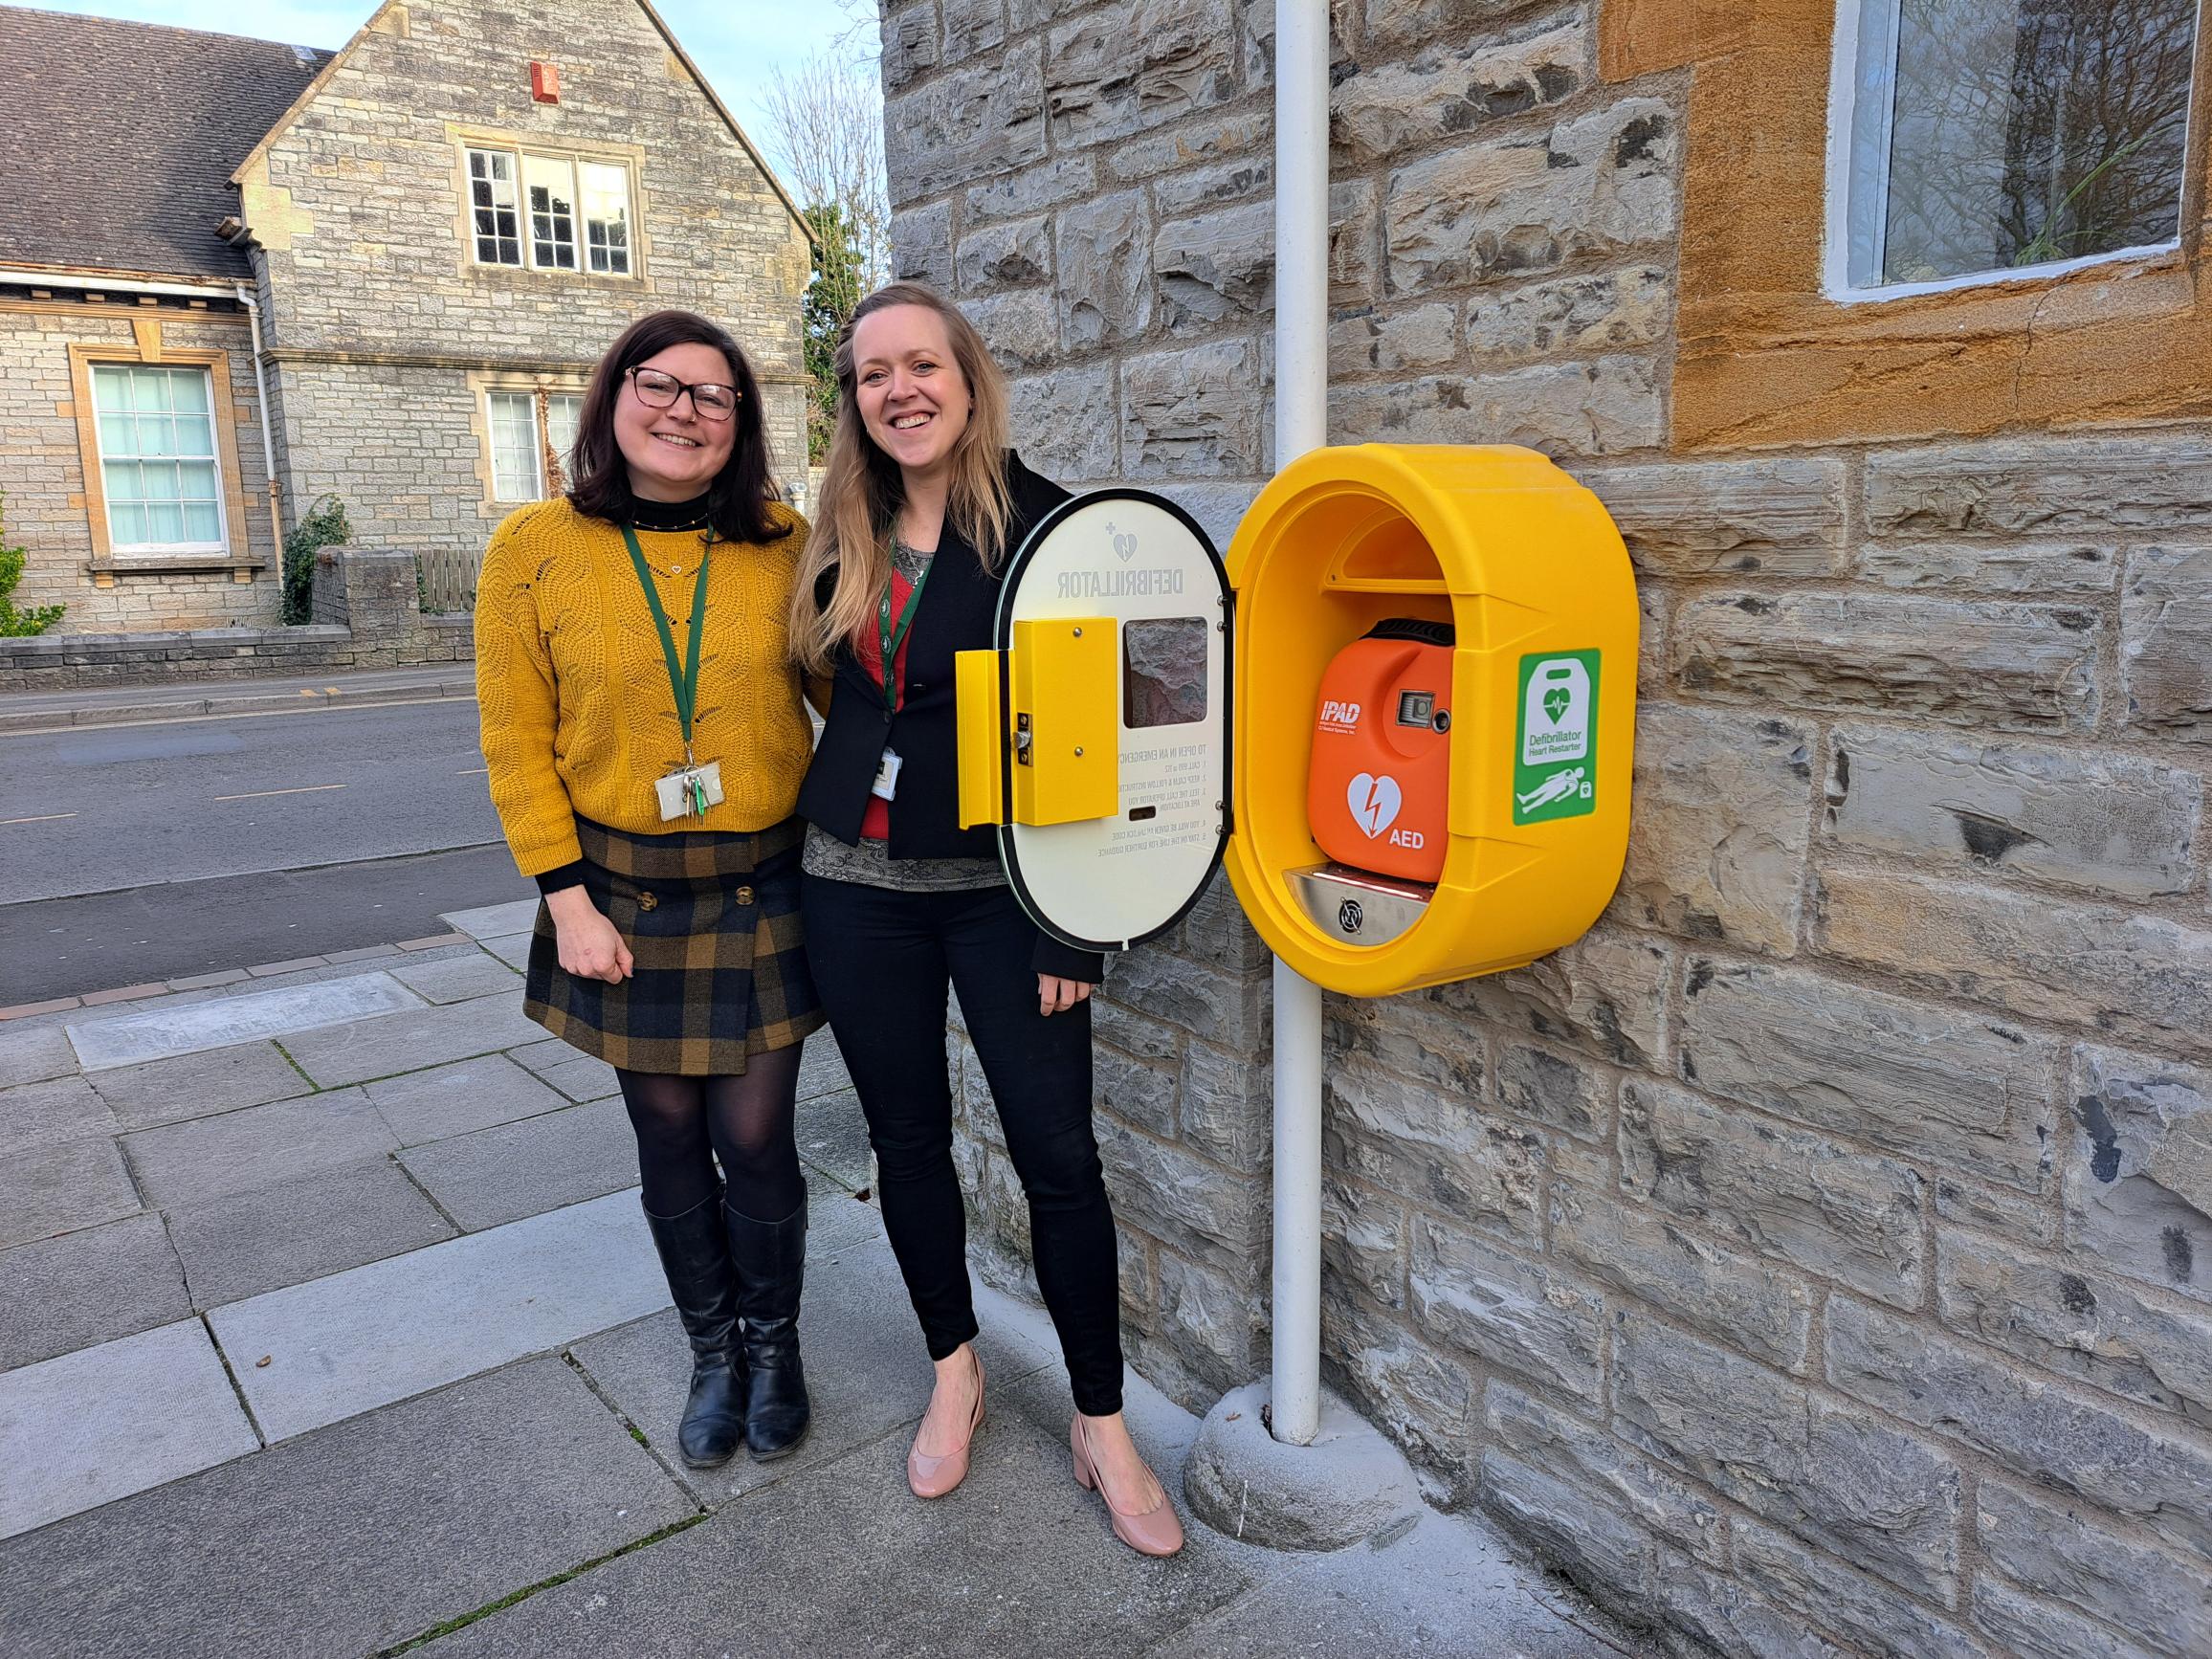 New defibrillator installed outside the council offices and Street Library!